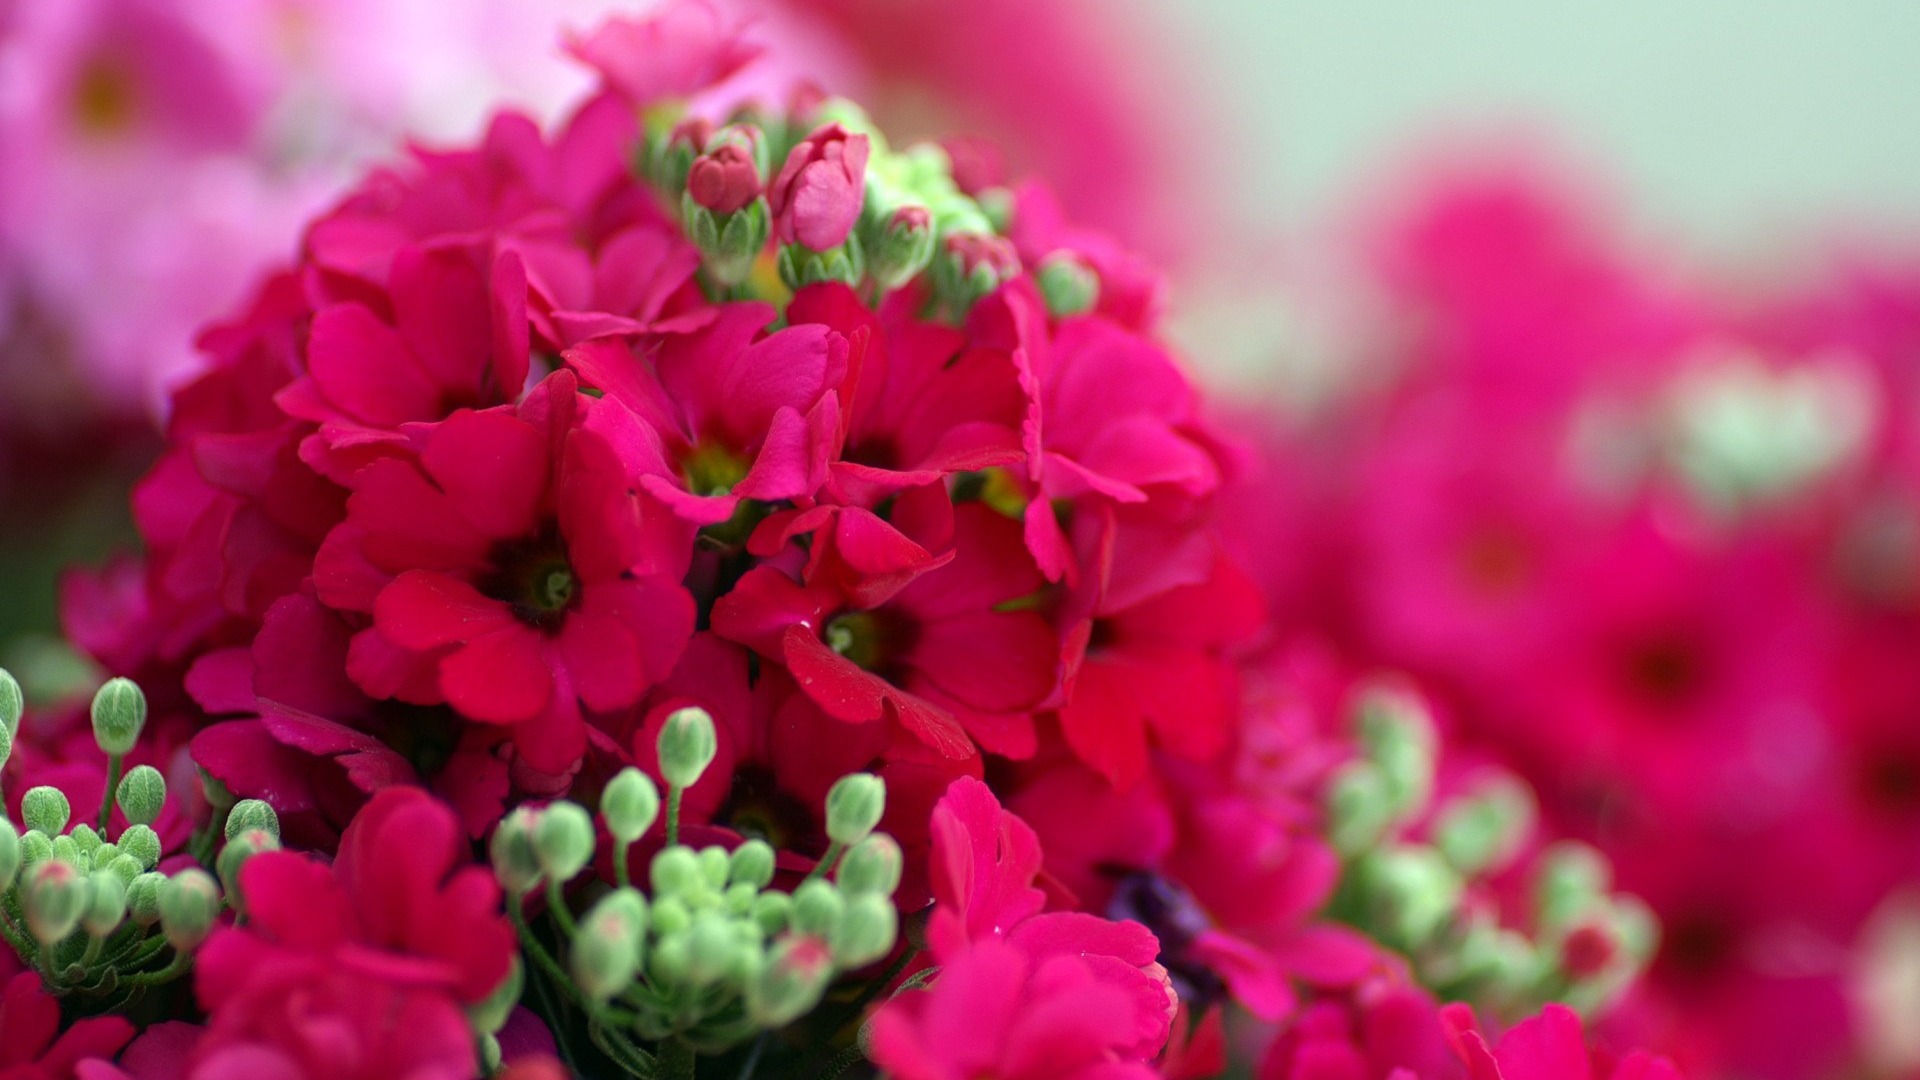 Personal Flowers HD Wallpapers #27 - 1920x1080